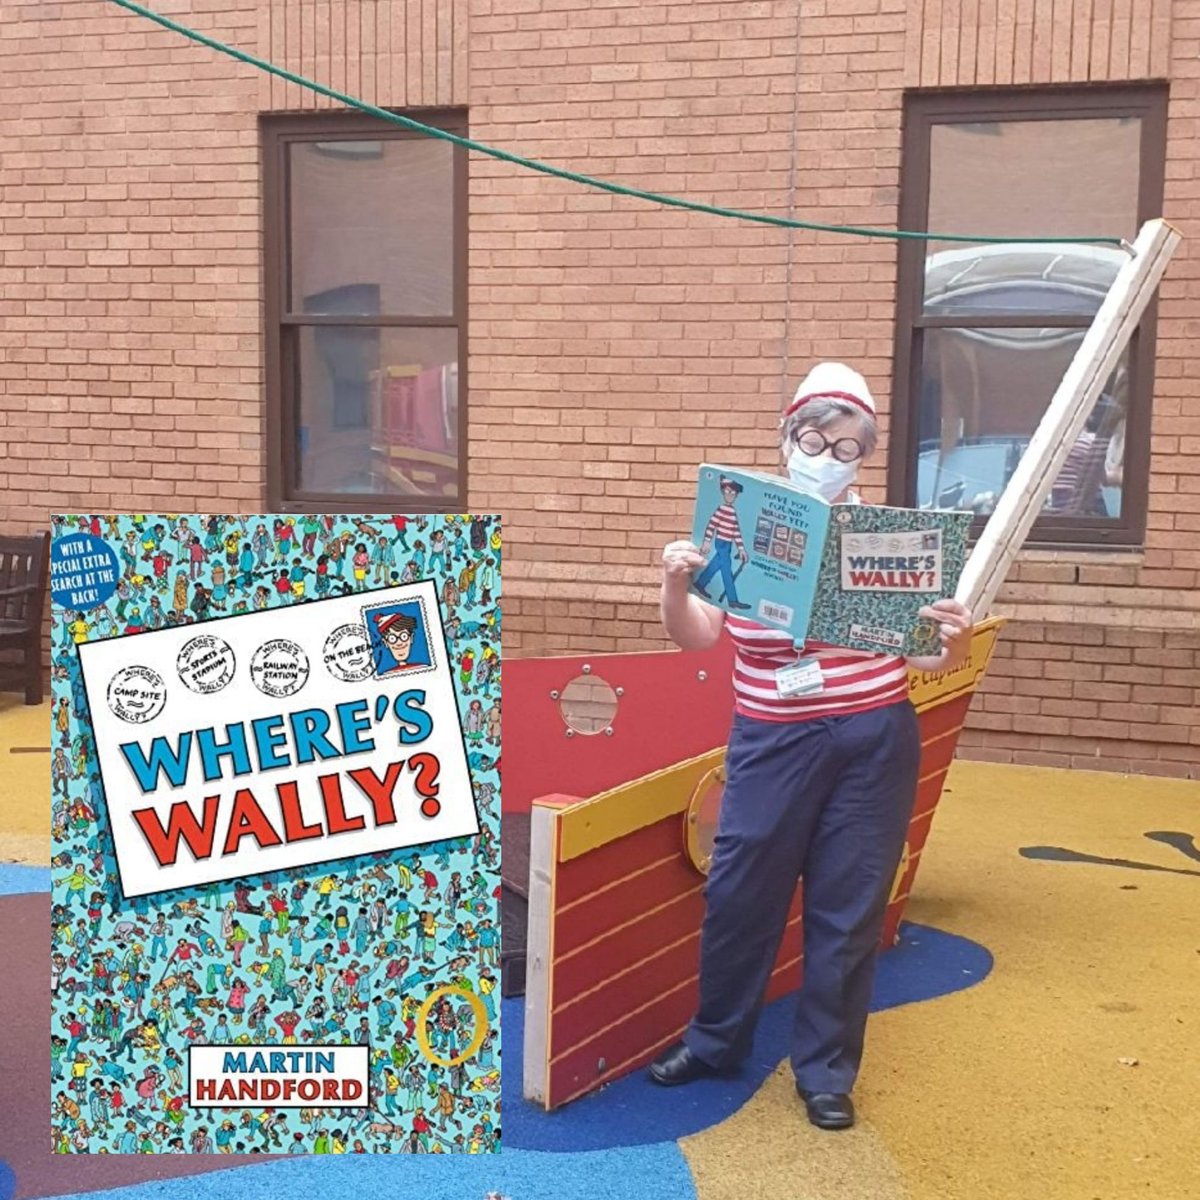 This book sure is a firm favourite on Ward B10/ B11.. @whereswally 👀

🔴⚪️🔴⚪️

#distractiontechniques
#whereswally 
#WorldBookDay #worldbookday2022 #paediatrics #childrensward #childfriendly #patientexperience #positiveexperiences #booksarefun #booksforkids